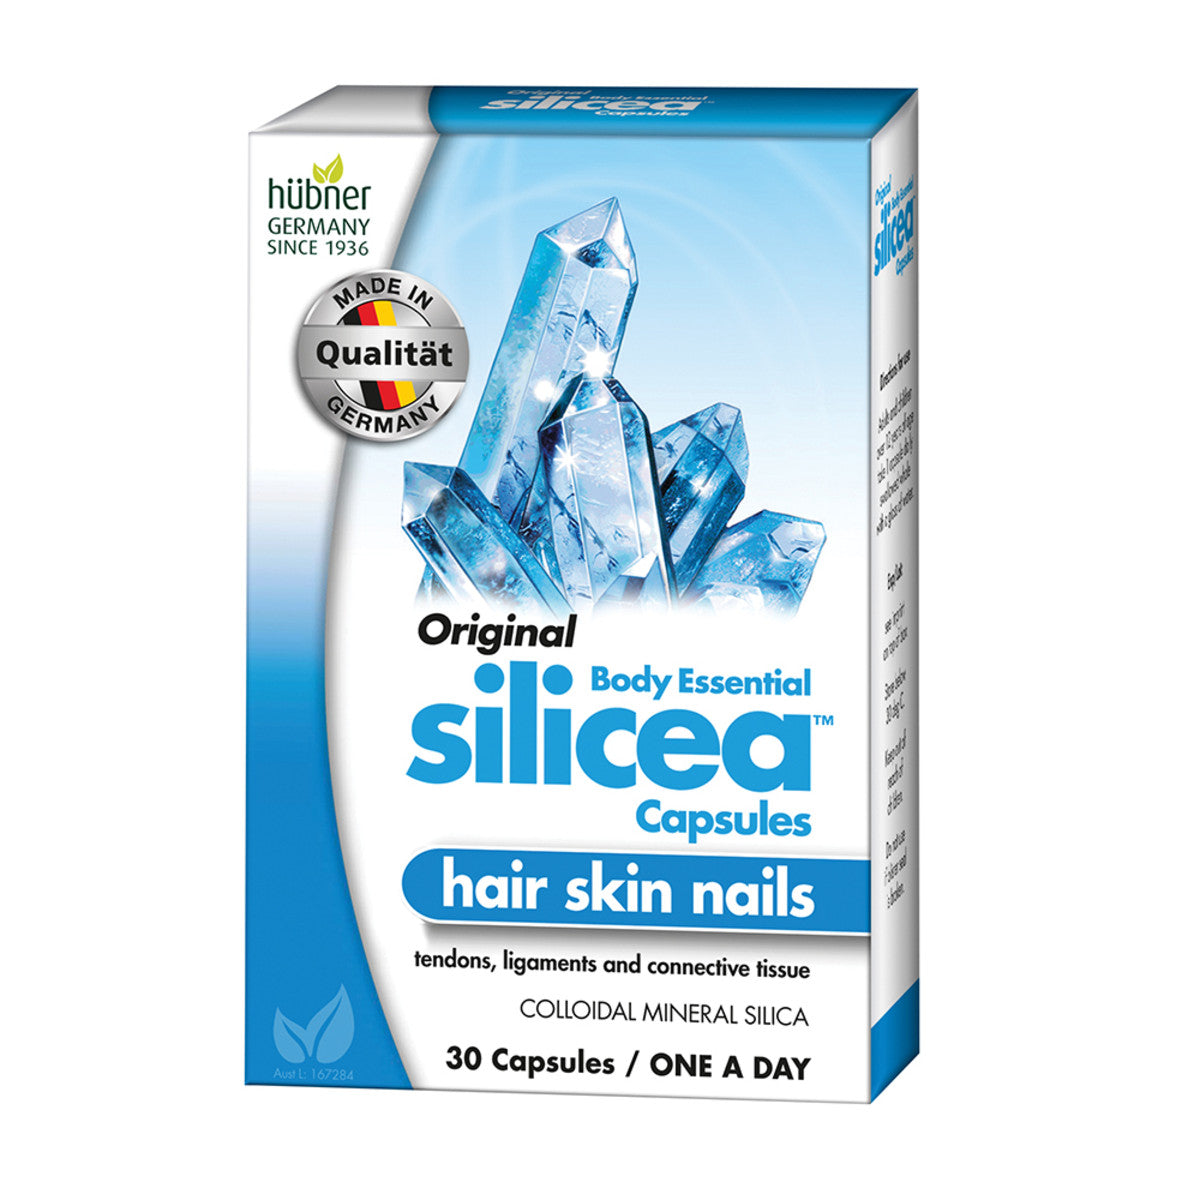 Hubner Silicea Body Essential Silicea 30 Or 60 Capsules, Hair Skin & Nails